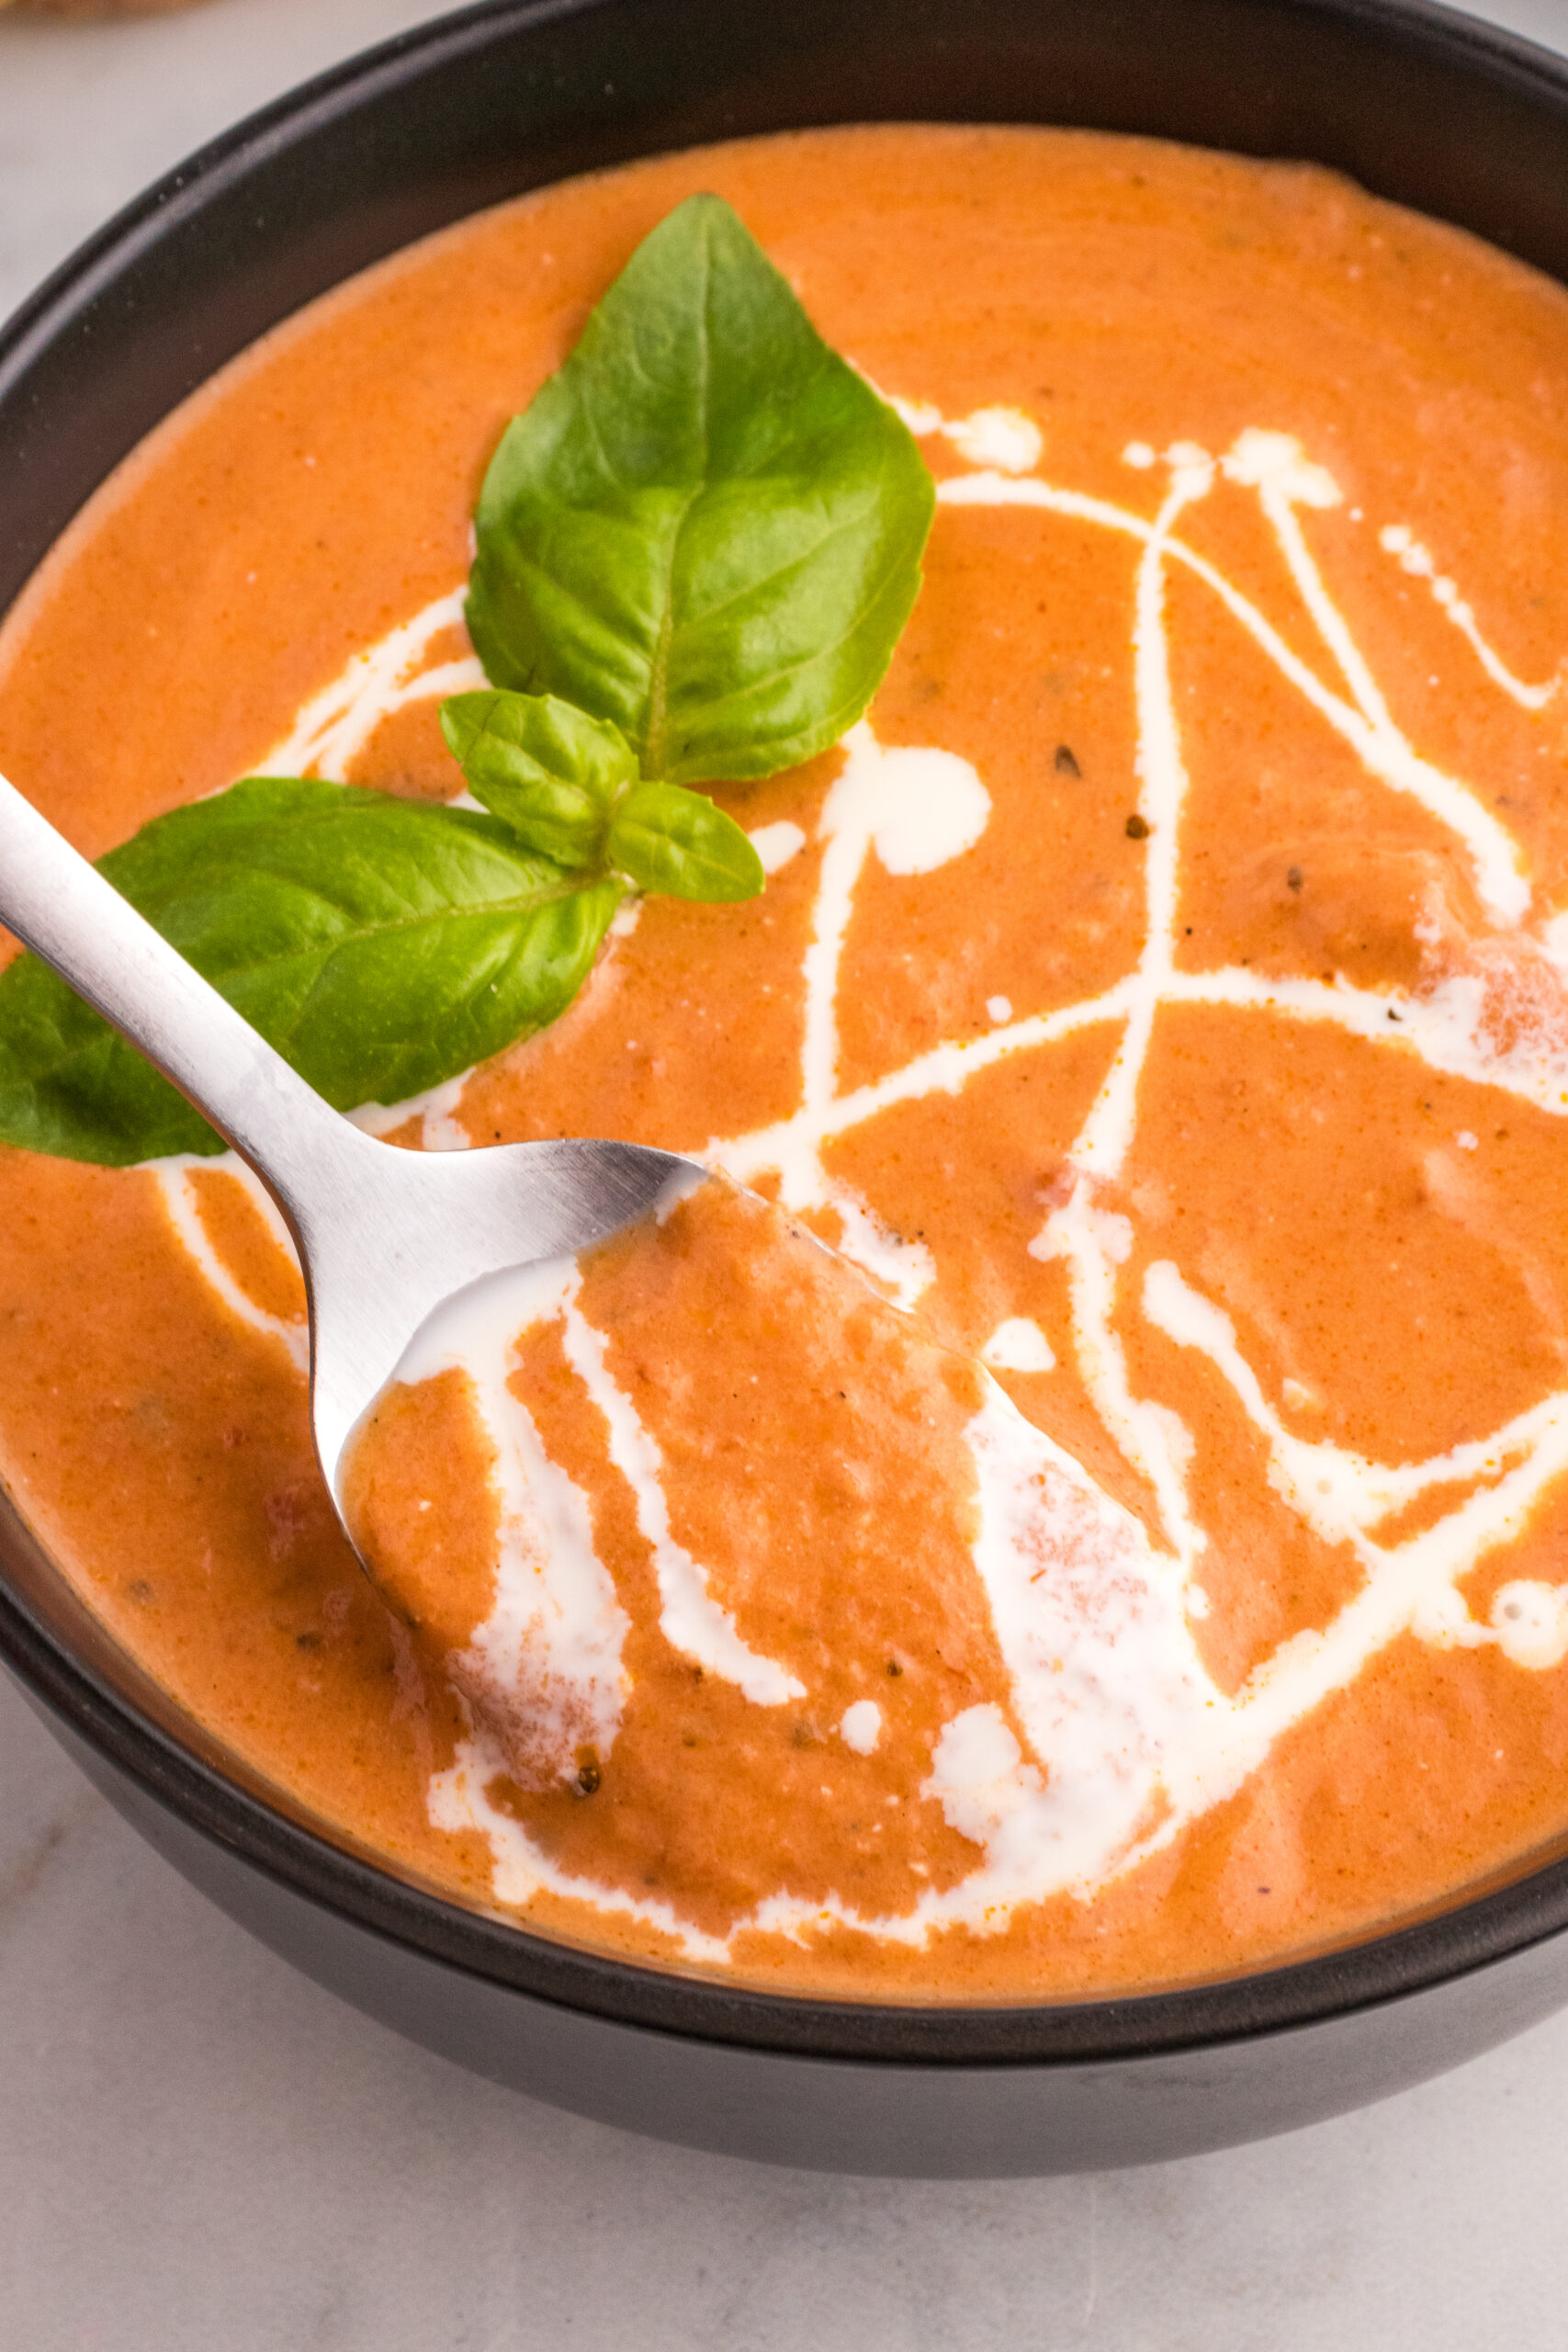 A spoon scoops a mouthful of creamy tomato soup out of the bowl.